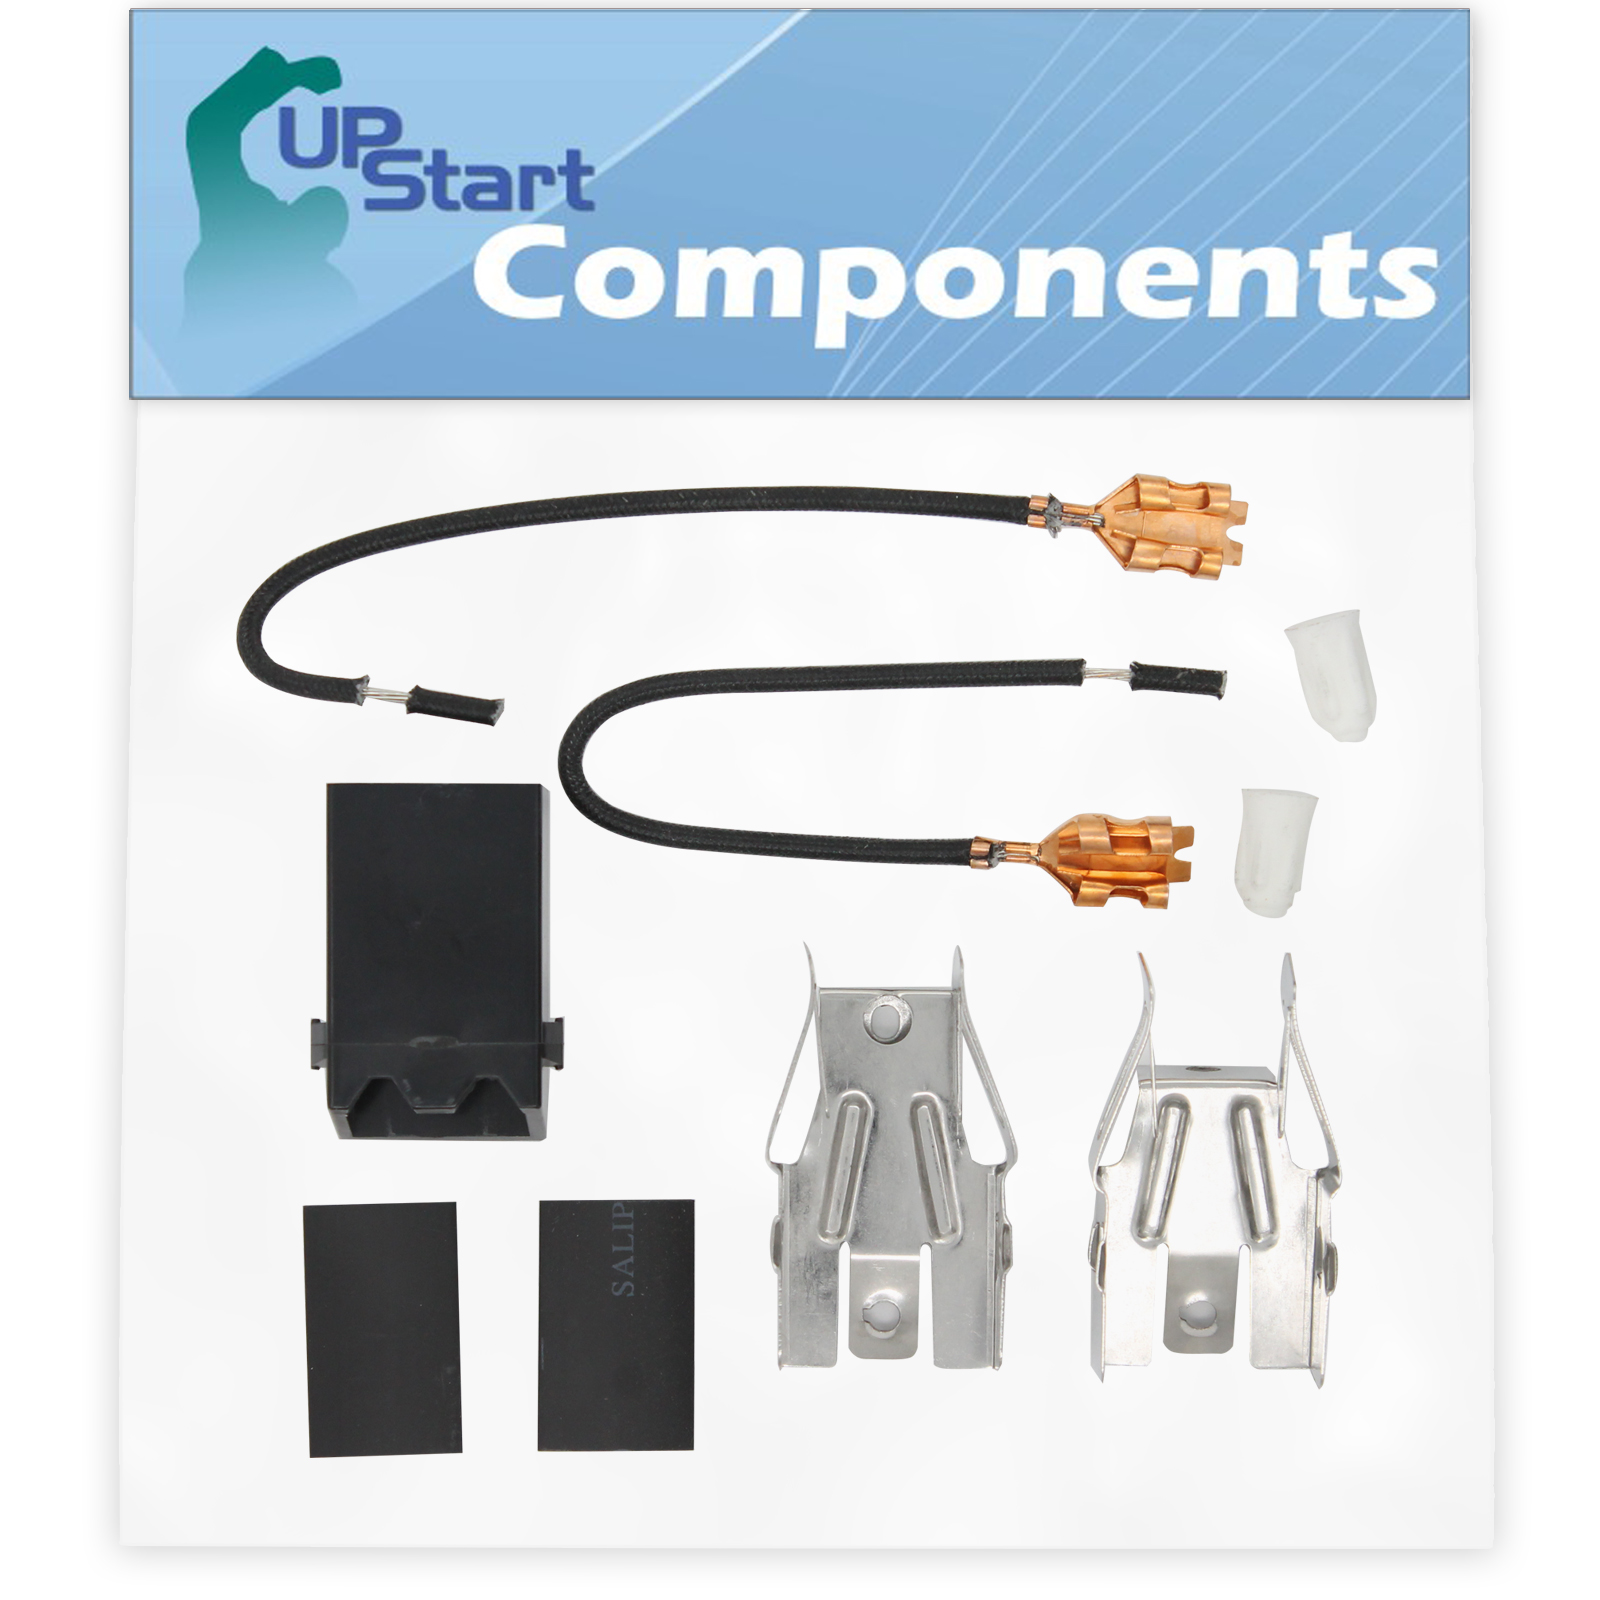 330031 Top Burner Receptacle Kit Replacement for Part Number AH340571 Range/Cooktop/Oven - Compatible with 330031 Range Burner Receptacle Kit - UpStart Components Brand - image 1 of 4